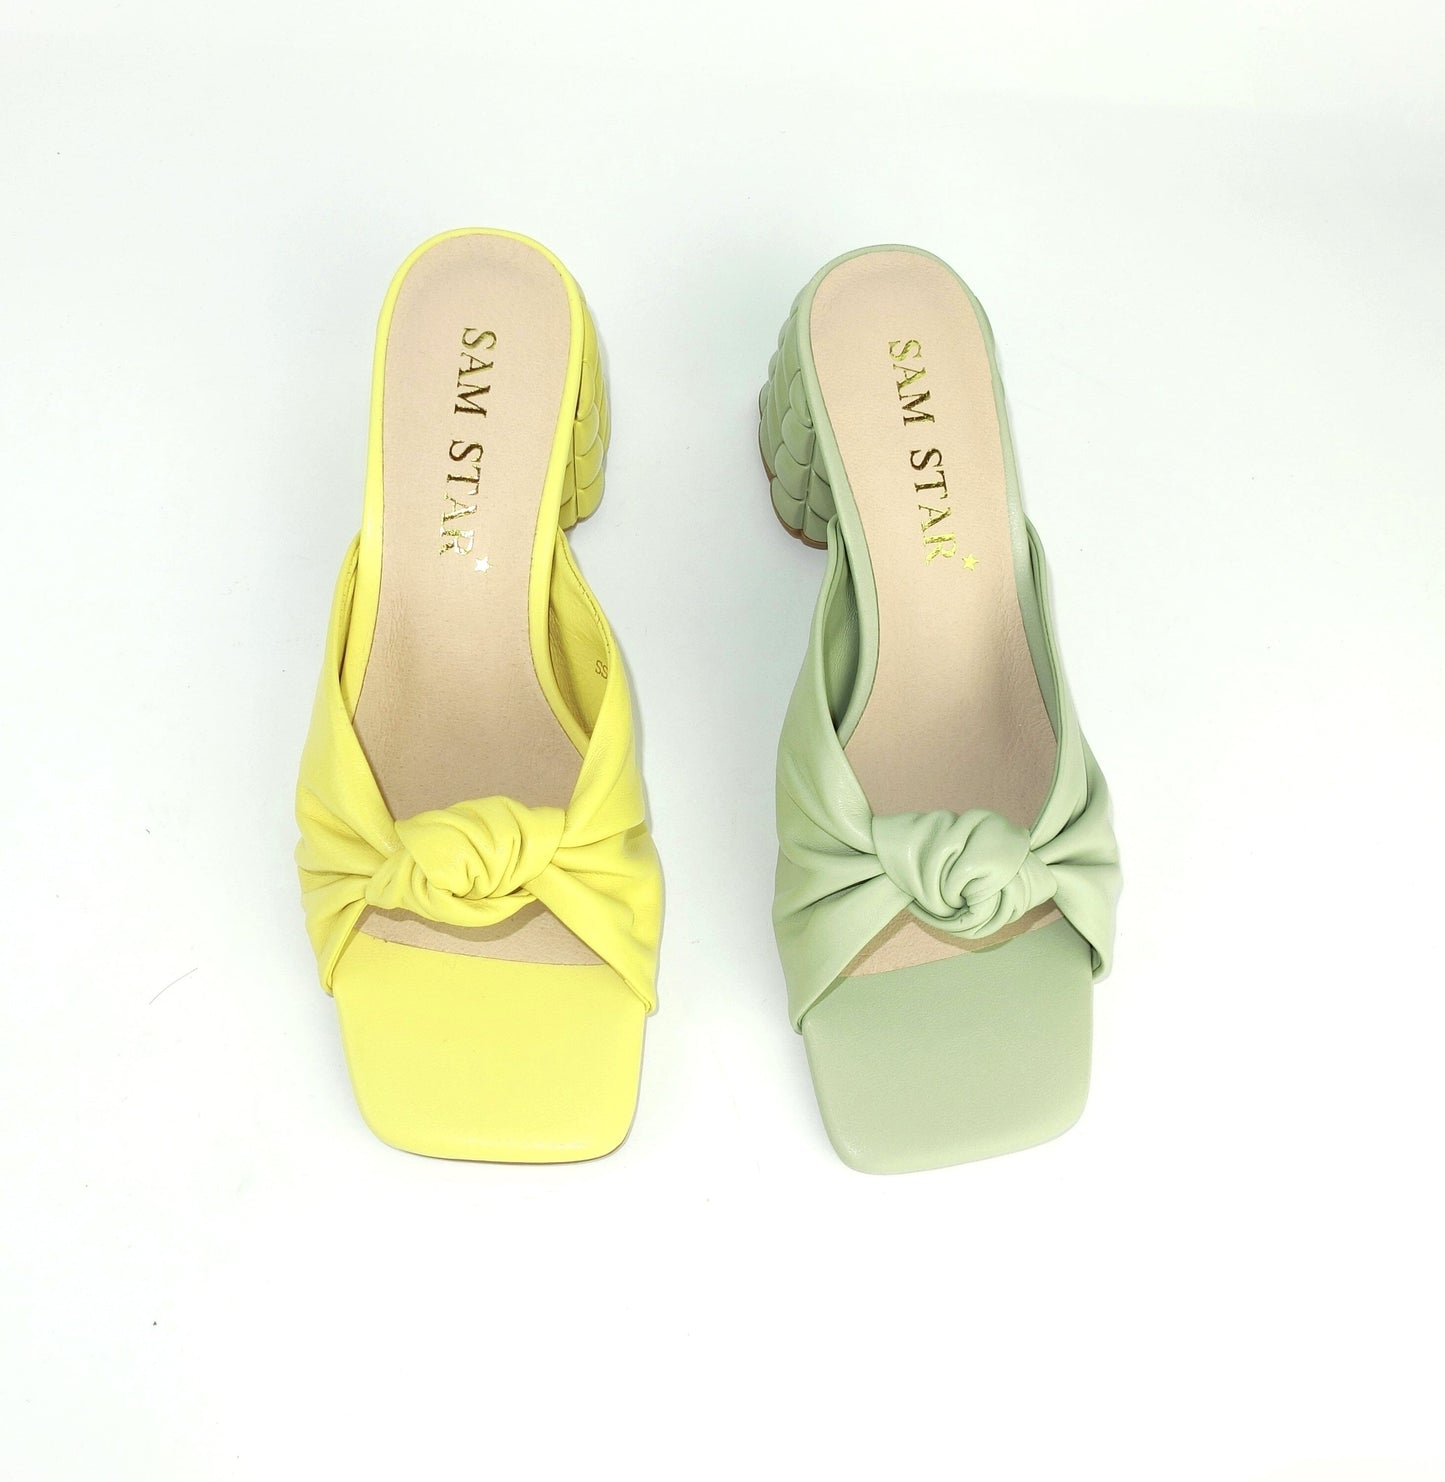 SS22013 Genuine leather bow tie block heel sandals in Mint